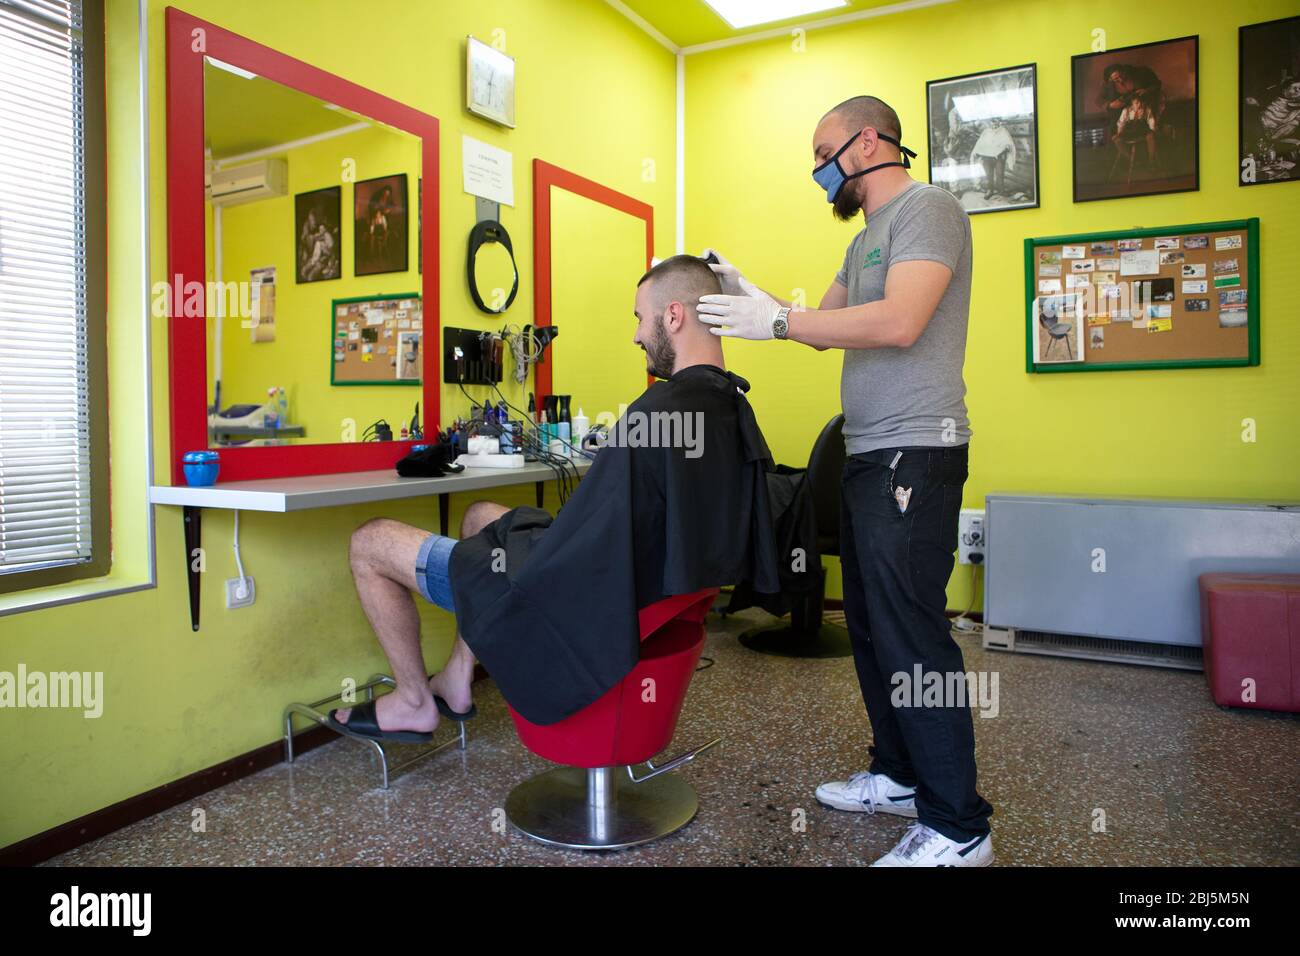 Belgrade, Serbia. 28th Apr, 2020. The hairdresser with protective mask and gloves cuts the client's hair after the reopening during the coronavirus disease (COVID-19).  Serbian President Aleksandar Vucic had declared the state of emergency to stop the spread of the coronavirus. Following the drop in the number of coronavirus patients the government from this week allows the reopening of hairdressers, gyms and markets. Credit: Nikola Krstic/Alamy Live News Stock Photo